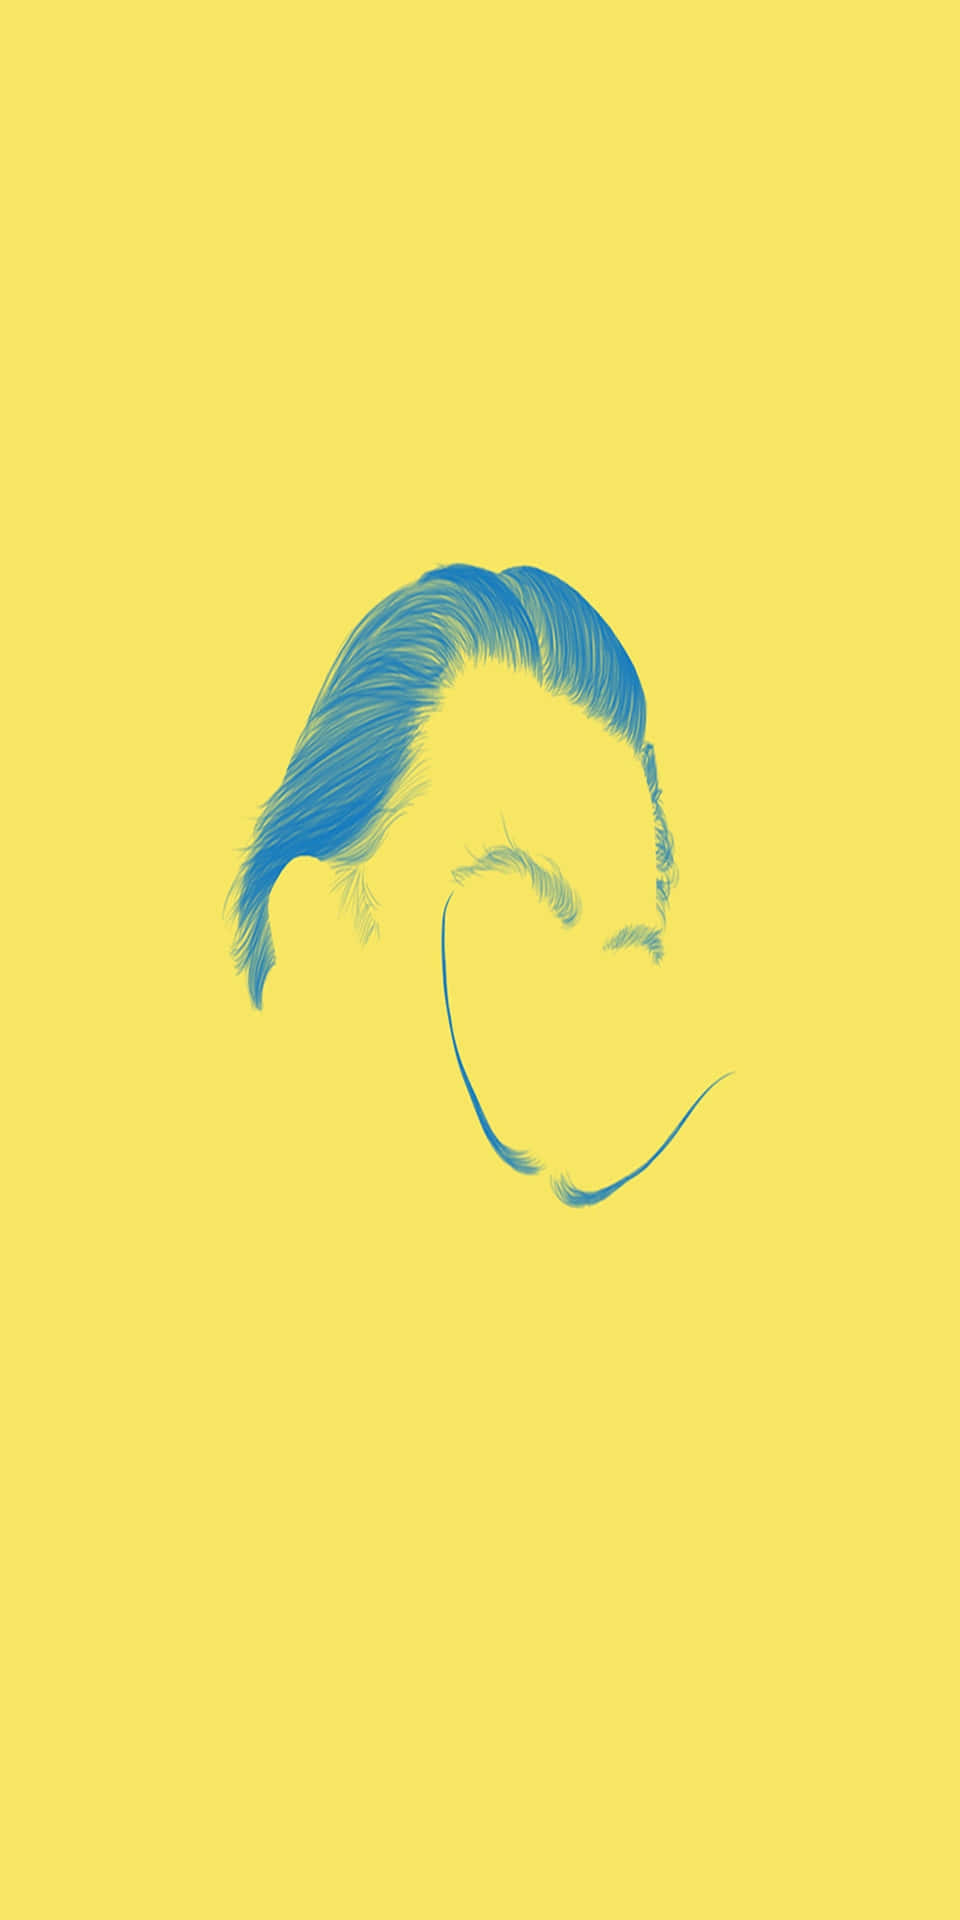 Pixel 3 Minimal Background Yellow Poster Of A Man